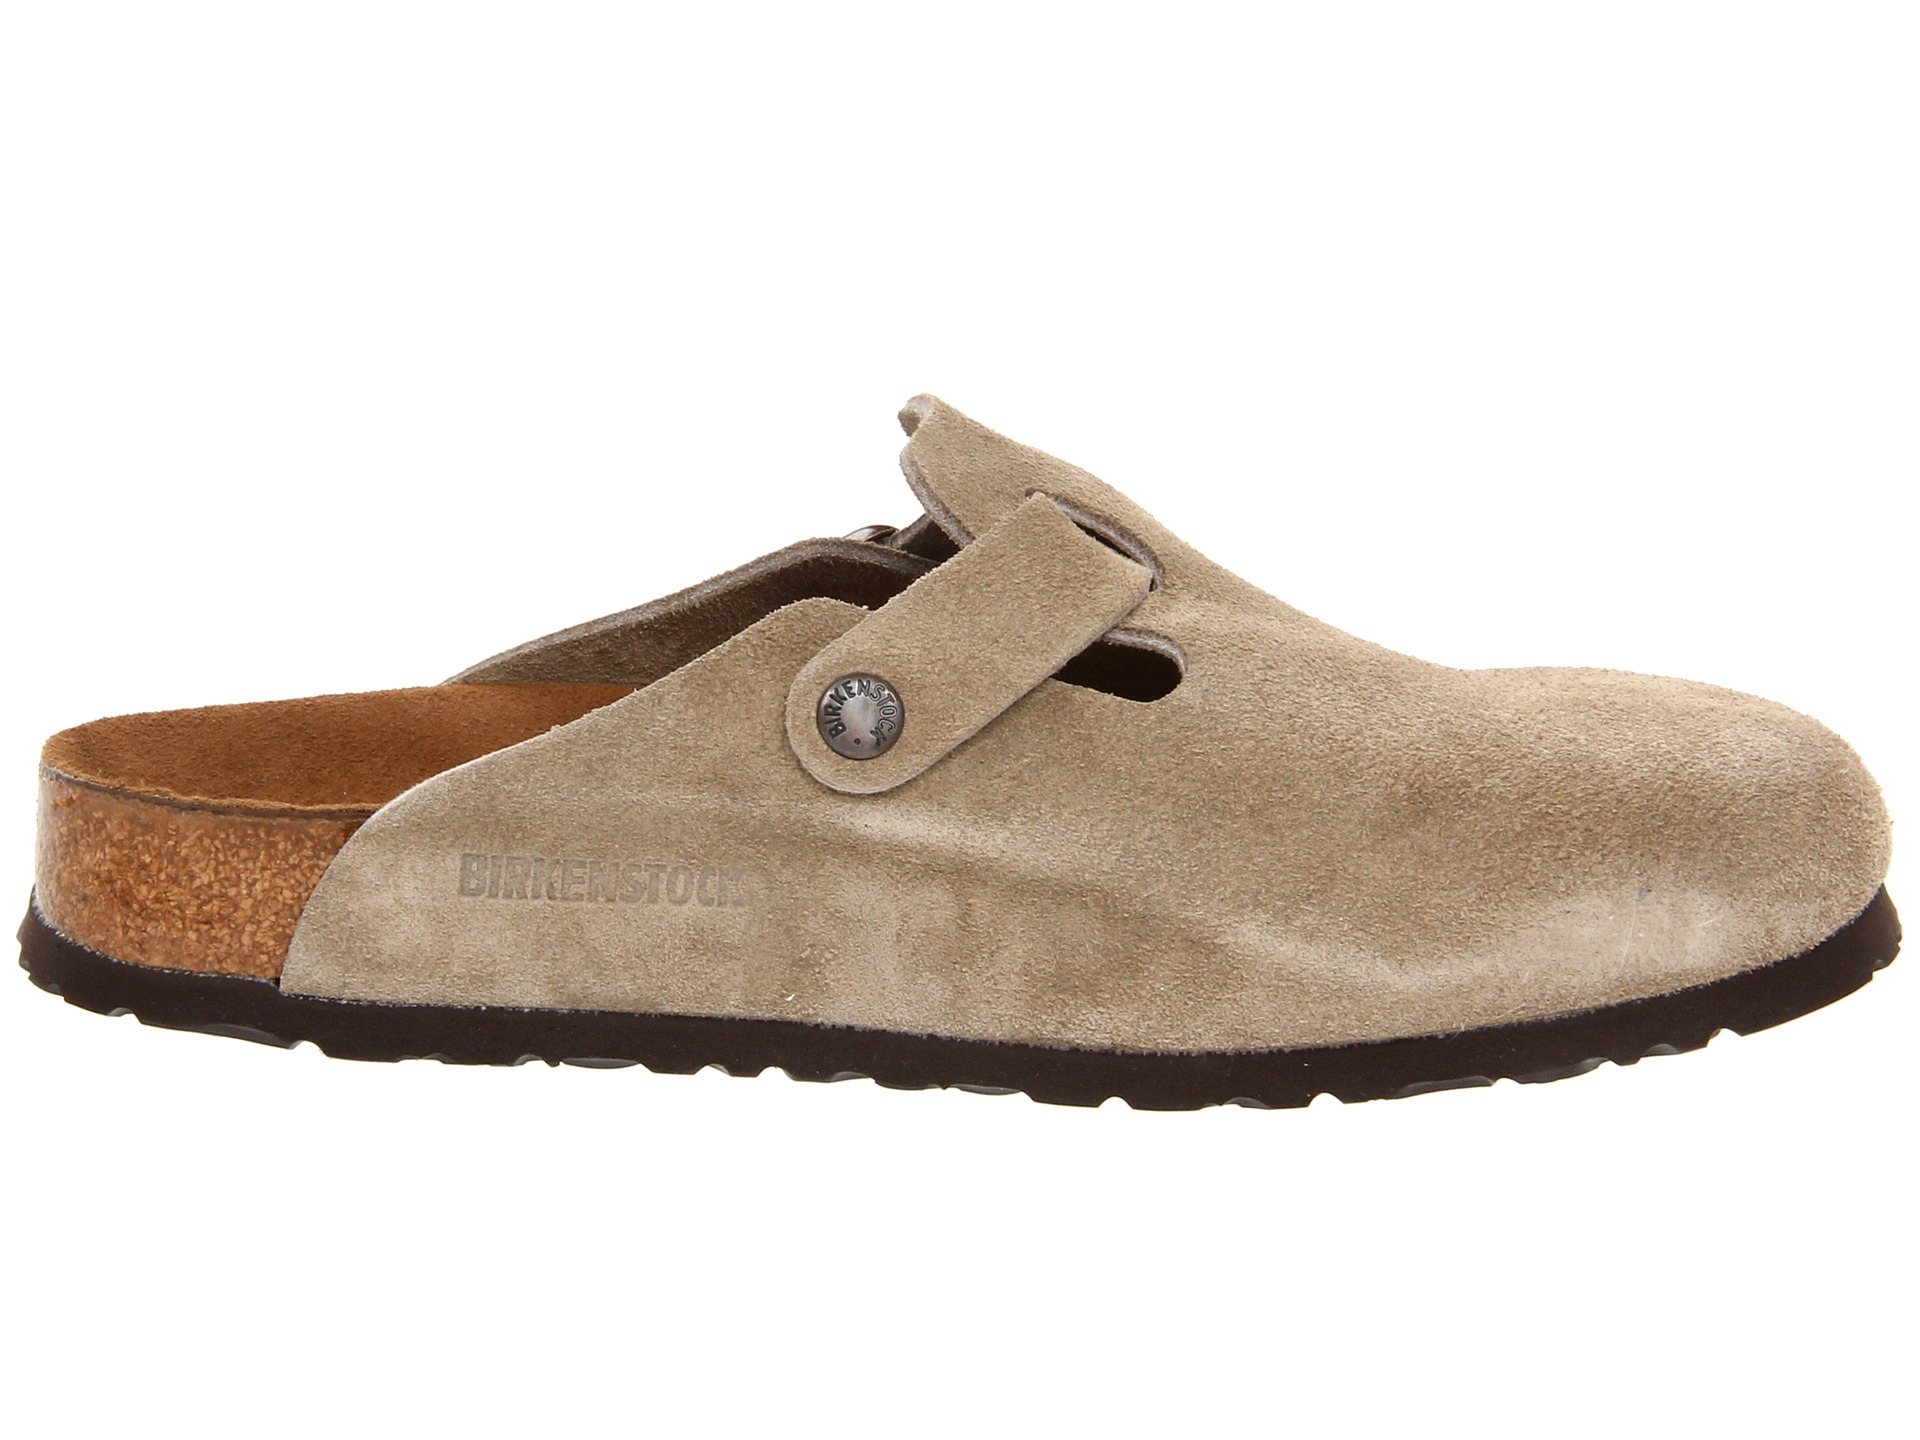 Birkenstock Boston High Arch, Shoes | Shipped Free at Zappos